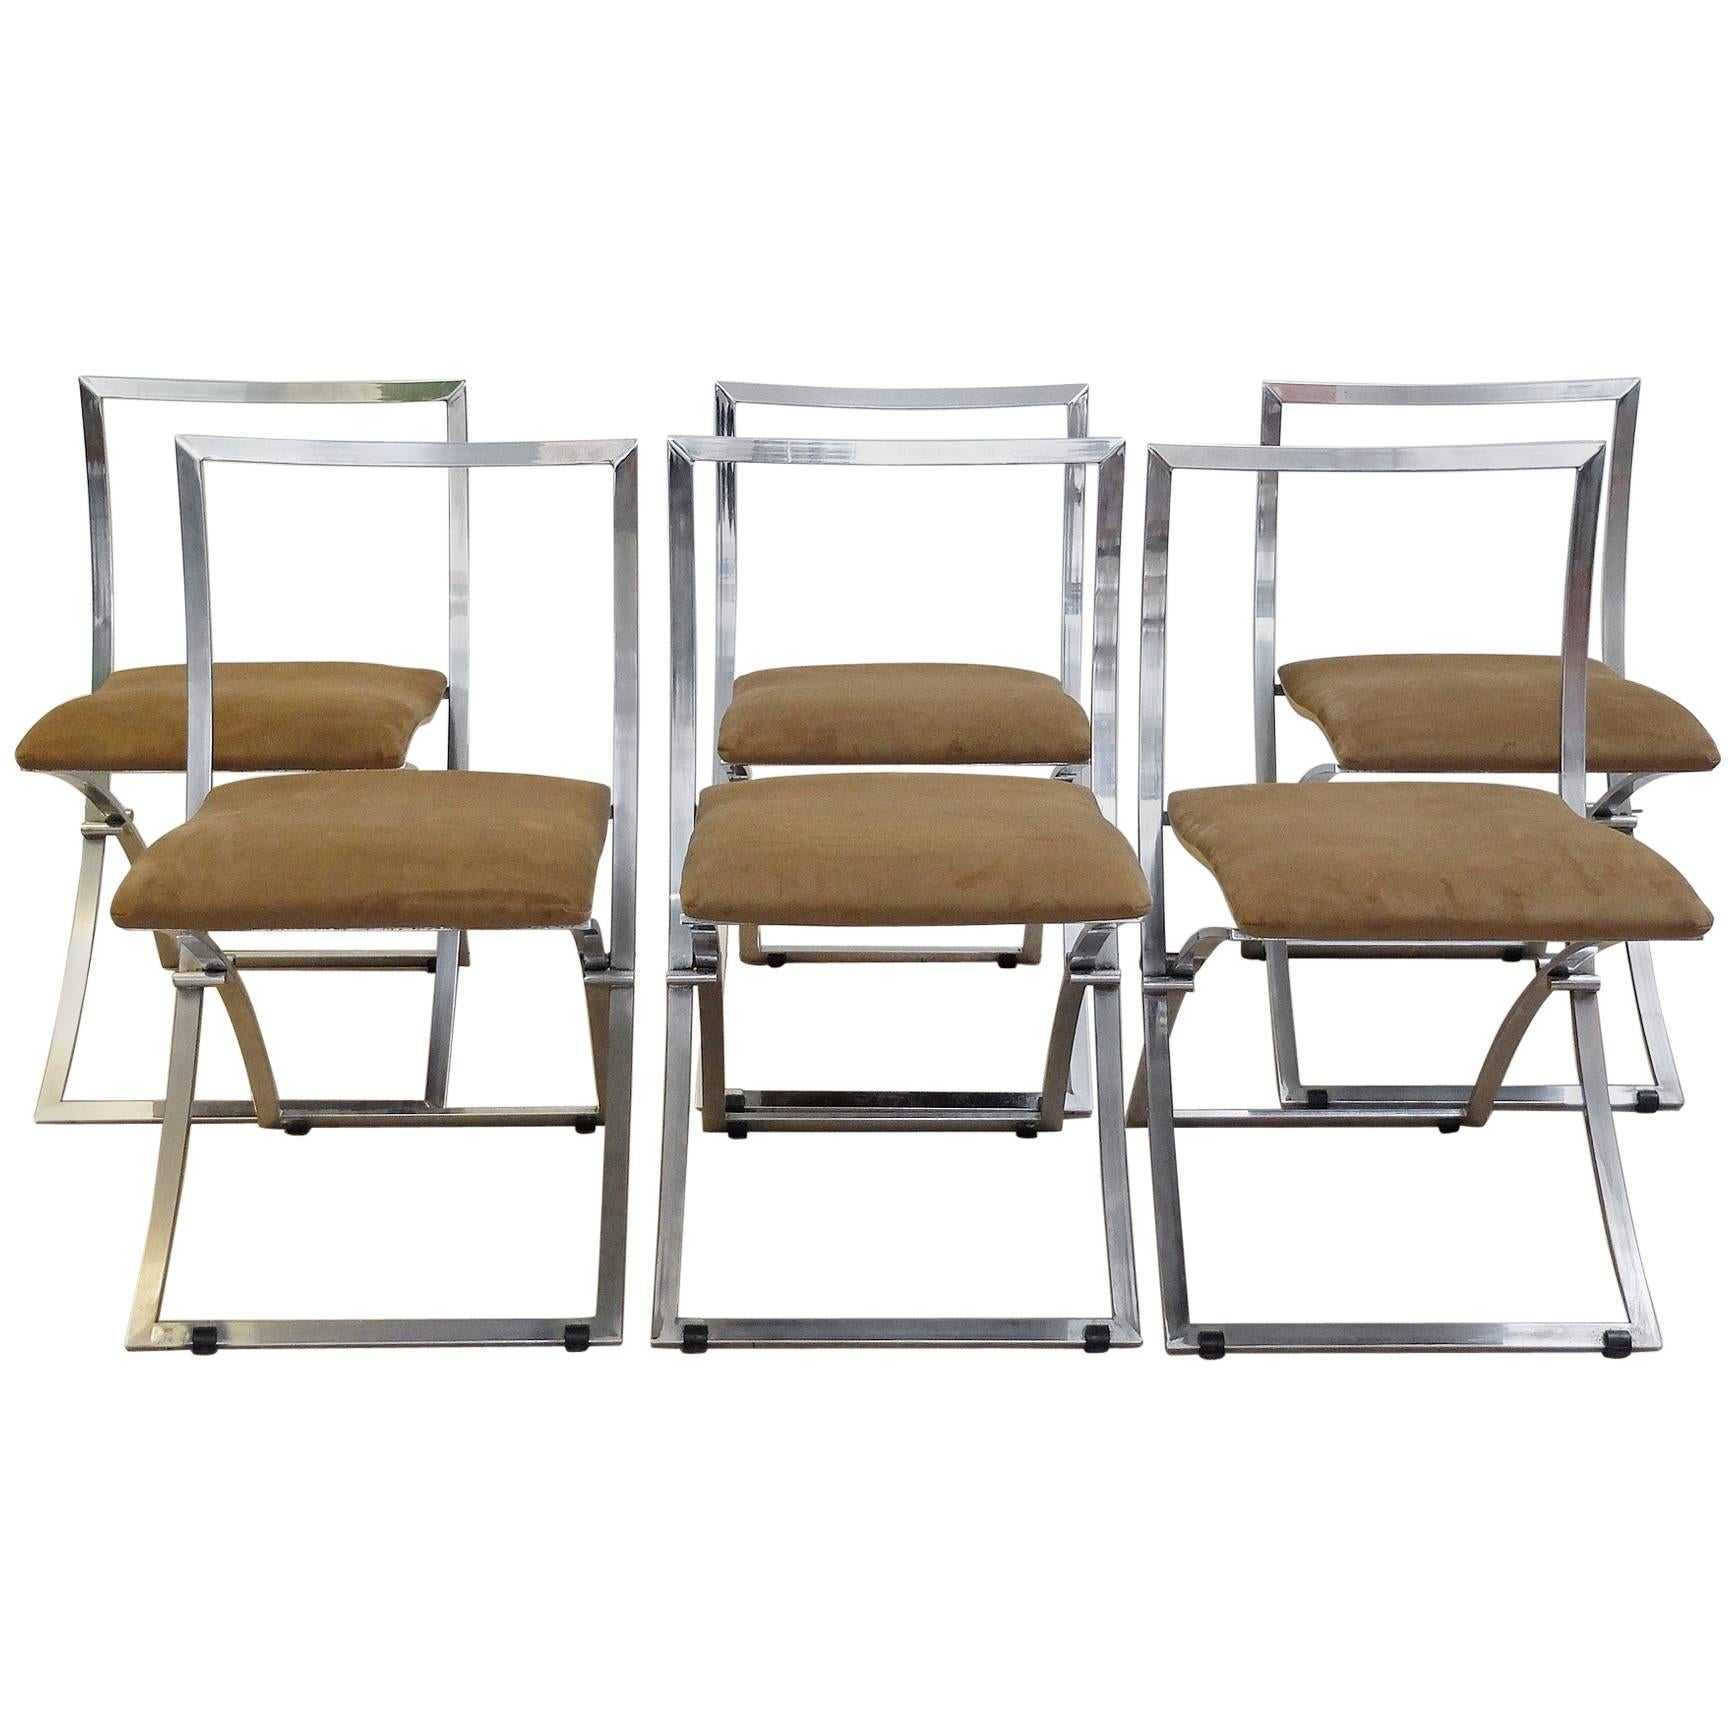 Six Marcello Cuneo Folding Chairs 'Model Luisa' for Mobel, Italia New Upholstery